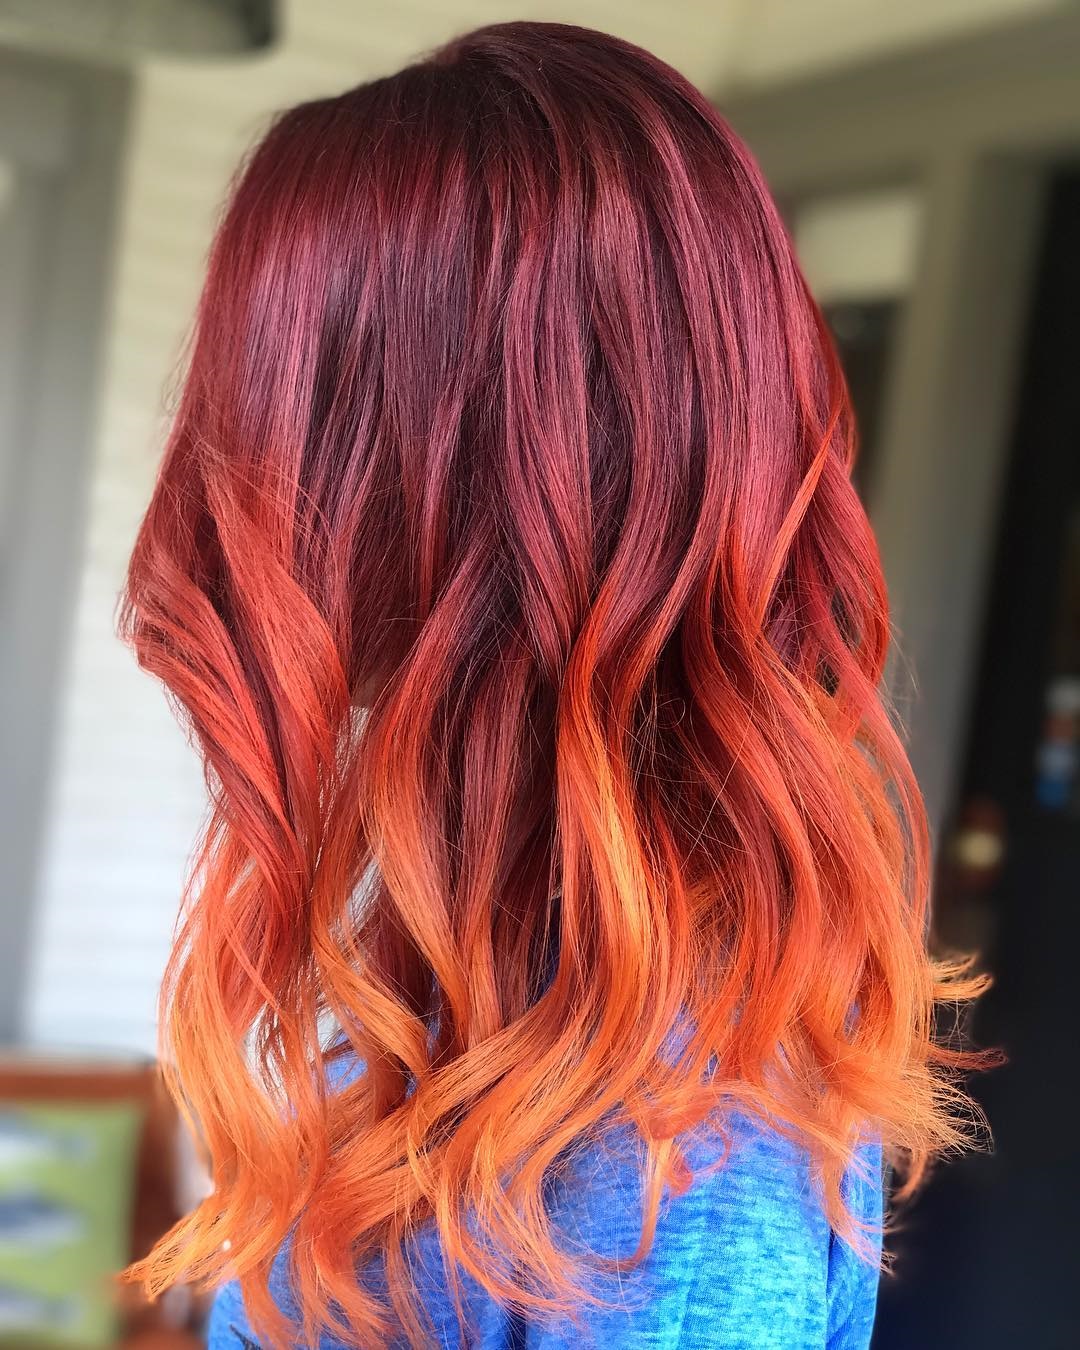 https://www.medfieldpubliclibrary.org/wp-content/uploads/2018/03/20-Radical-Styling-Ideas-For-Your-Red-Ombre-Hair.jpg